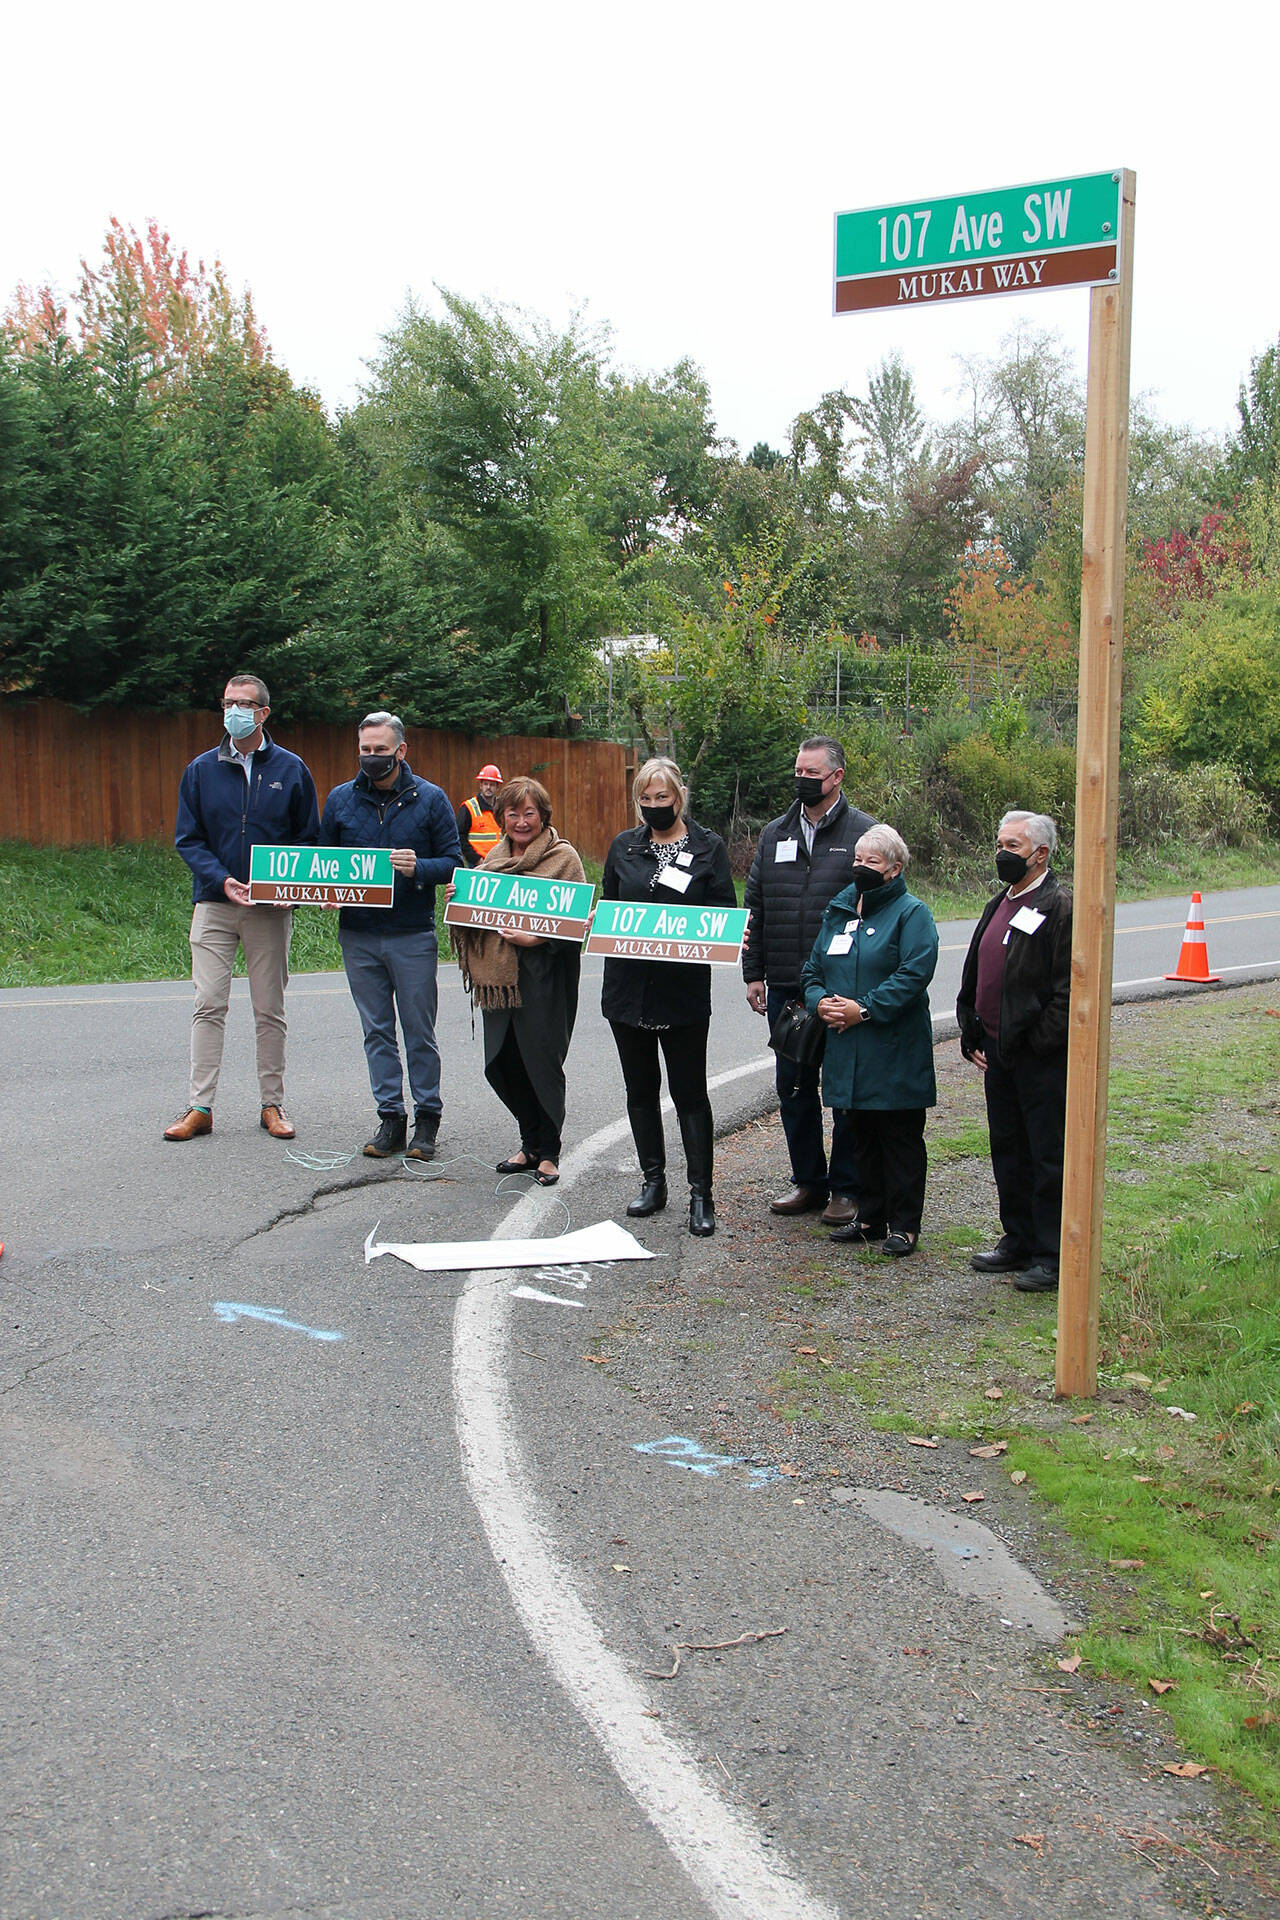 (Jenna Dennison Photo)
King County Councilmember Joe McDermott, King County Executive Dow Constantine, Friends of Mukai President Rita Brogan, and descendants of the Mukai family stand with the unveiled sign for “Mukai Way.”